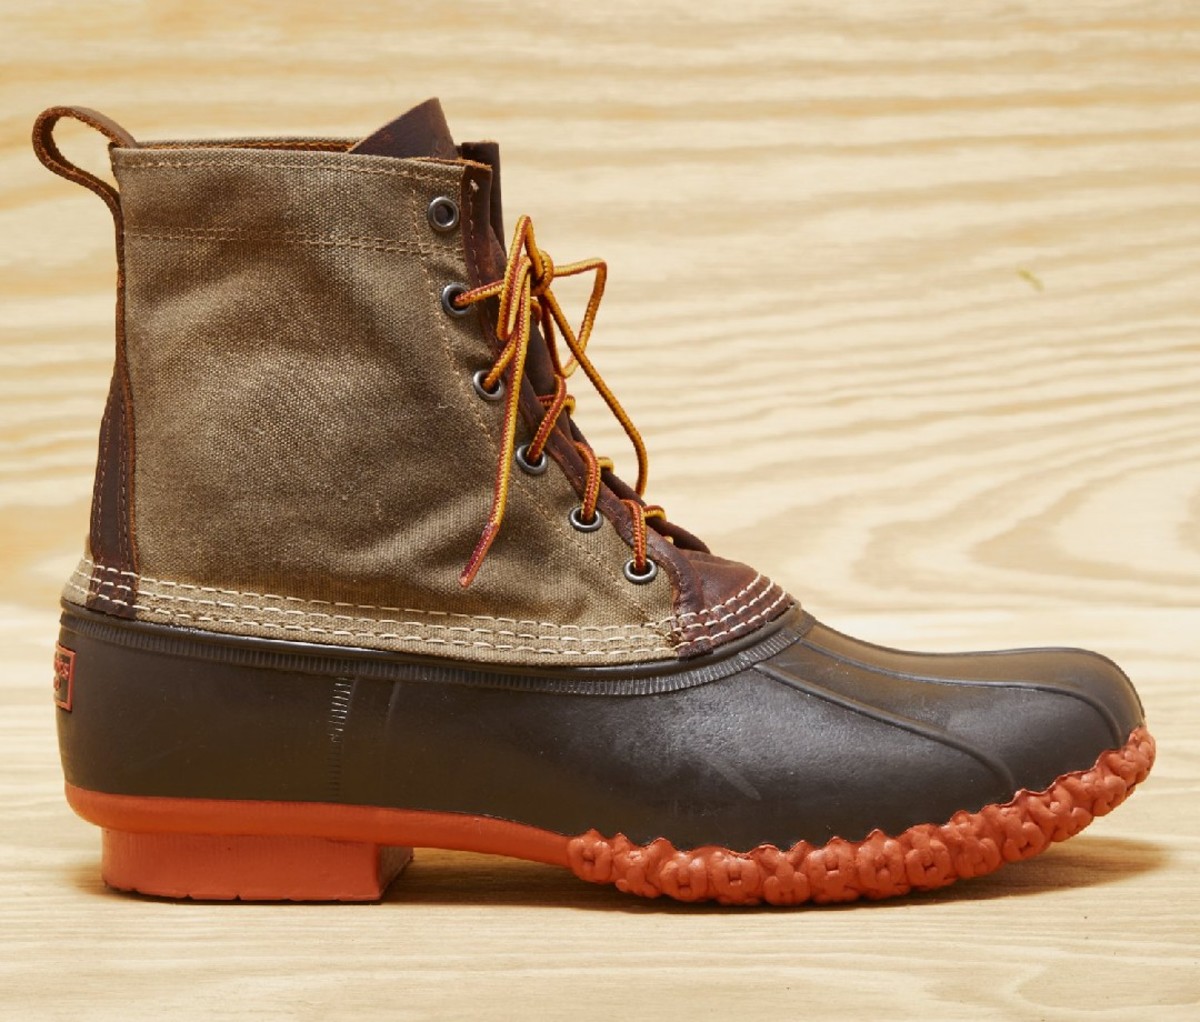 L.L.BEAN X TODD SNYDER Waxed Canvas Bean Boots In Olive